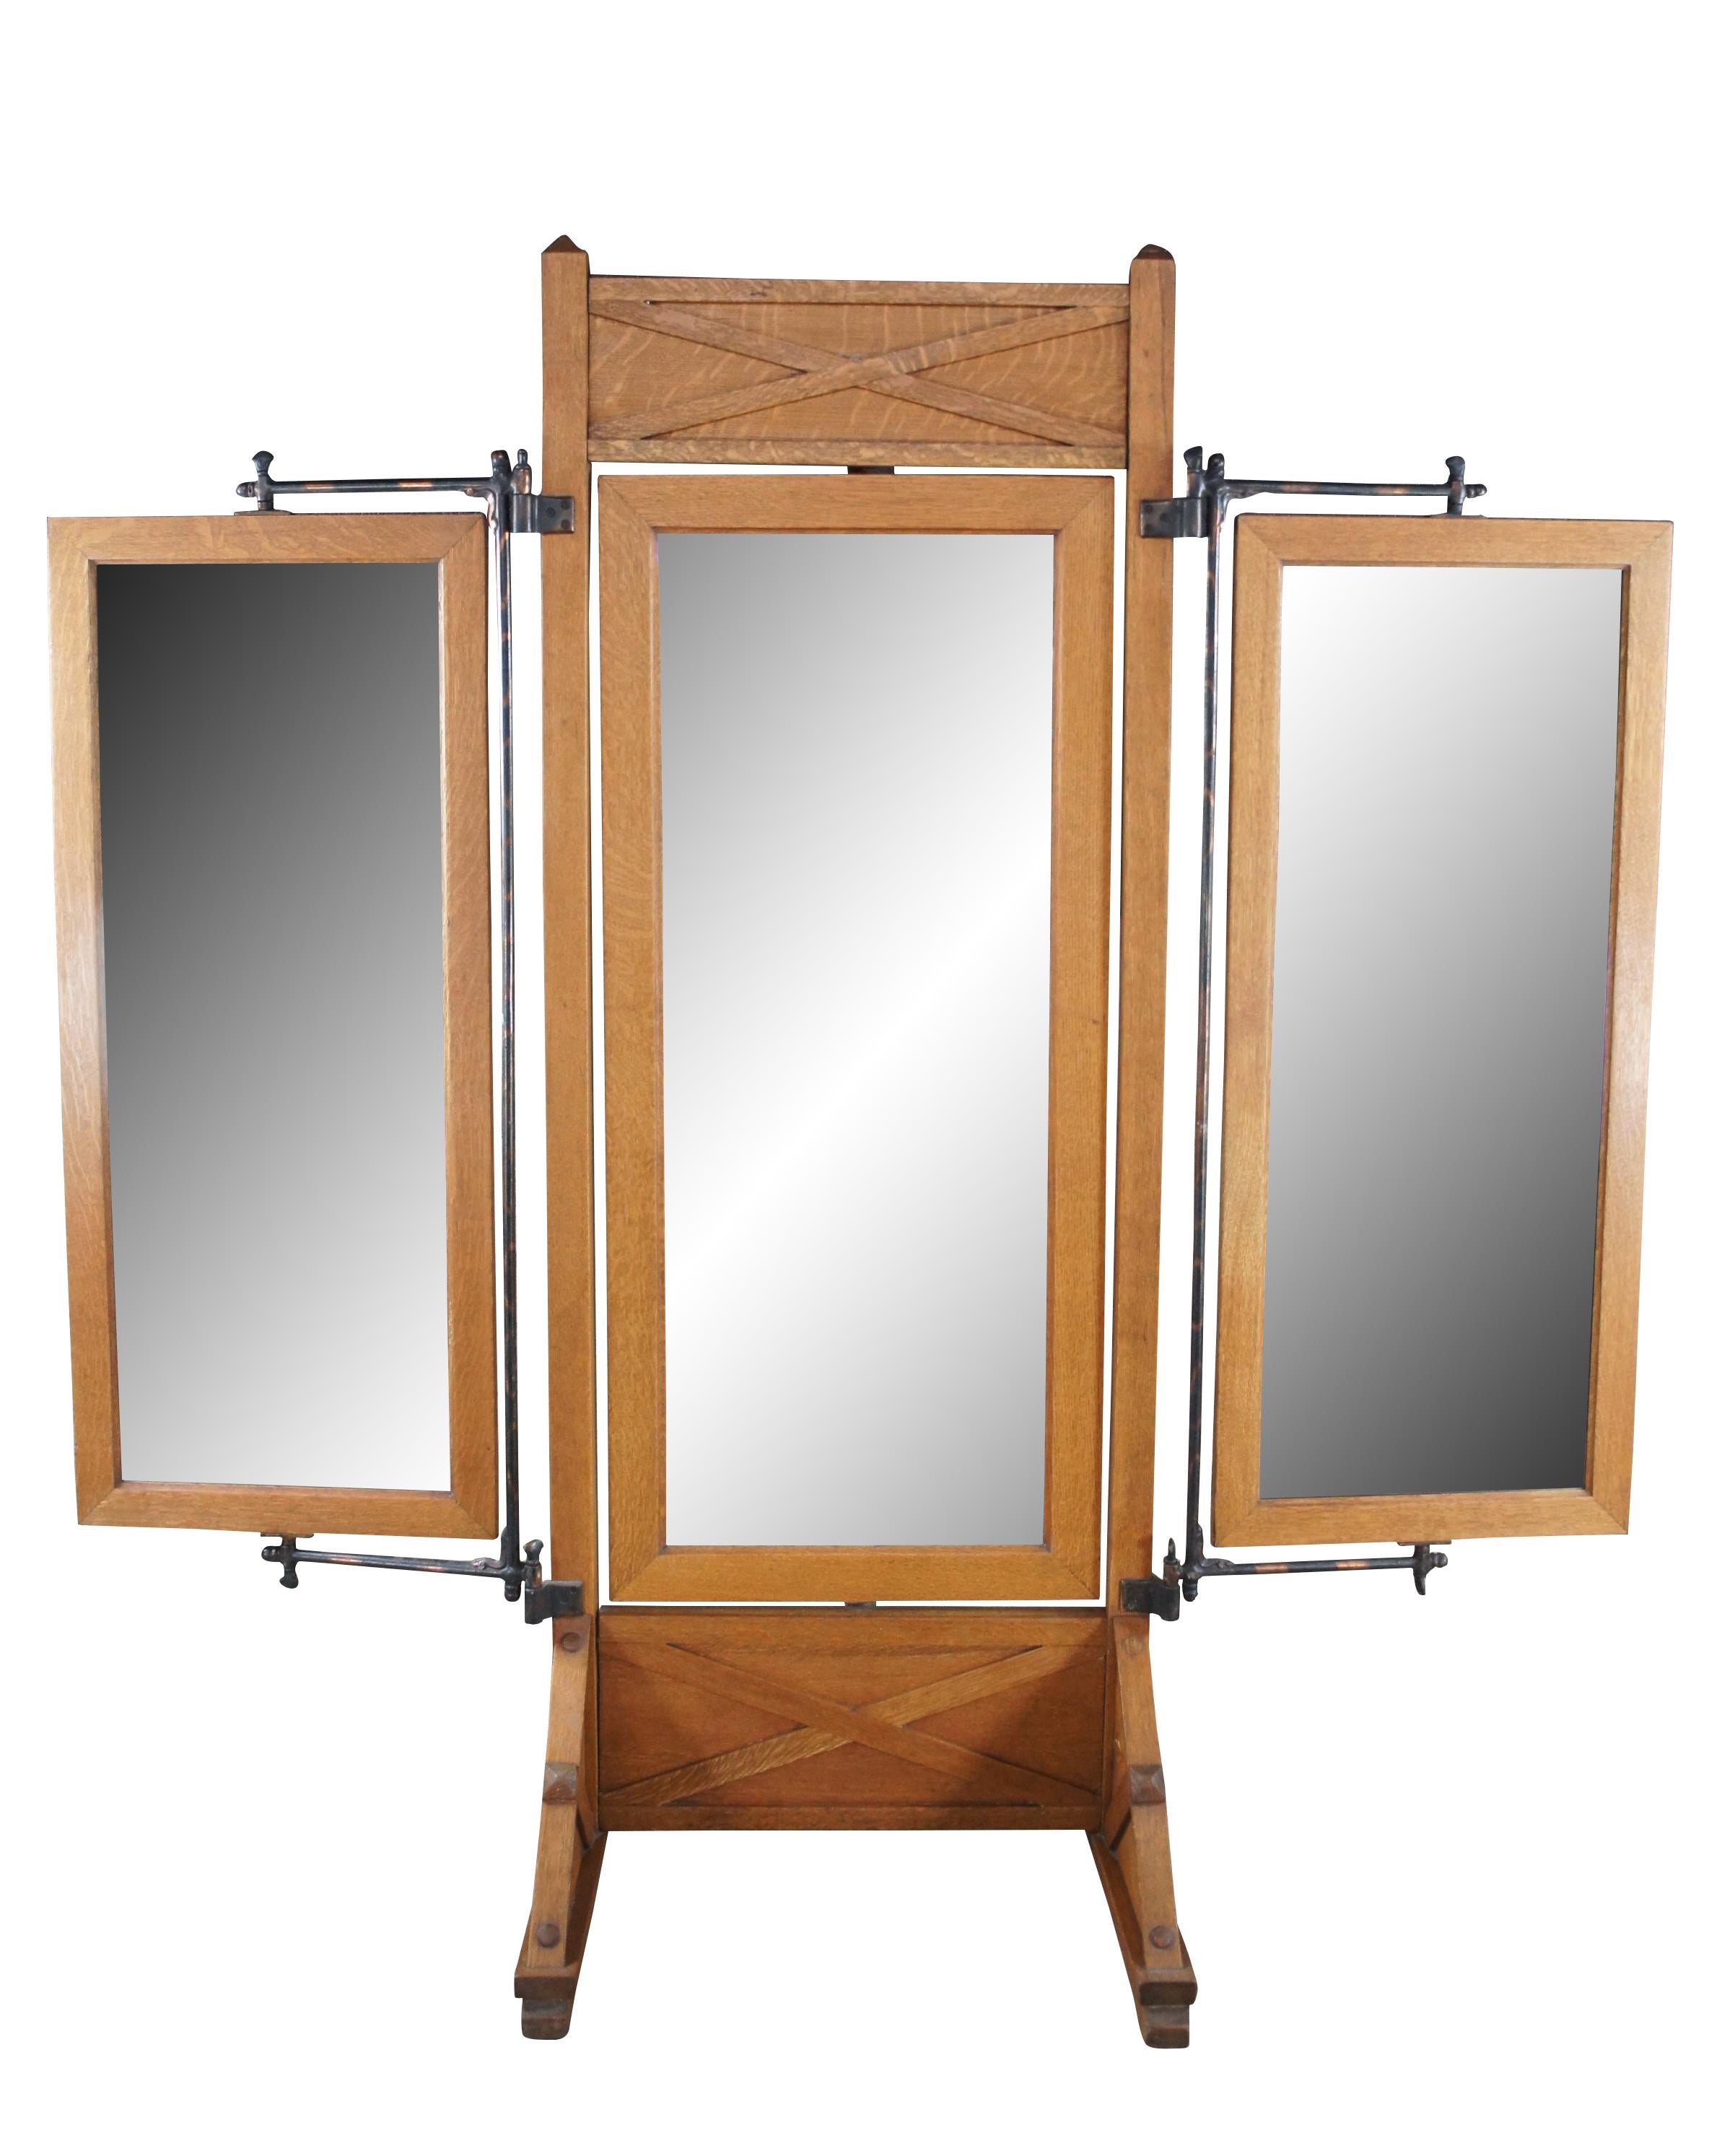 A very large and impressive antique triple cheval tailor / Haberdashers dressing mirror.  Made of quartersawn oak featuring mission styling with unique trifold pivoting design.

Dimensions:
84